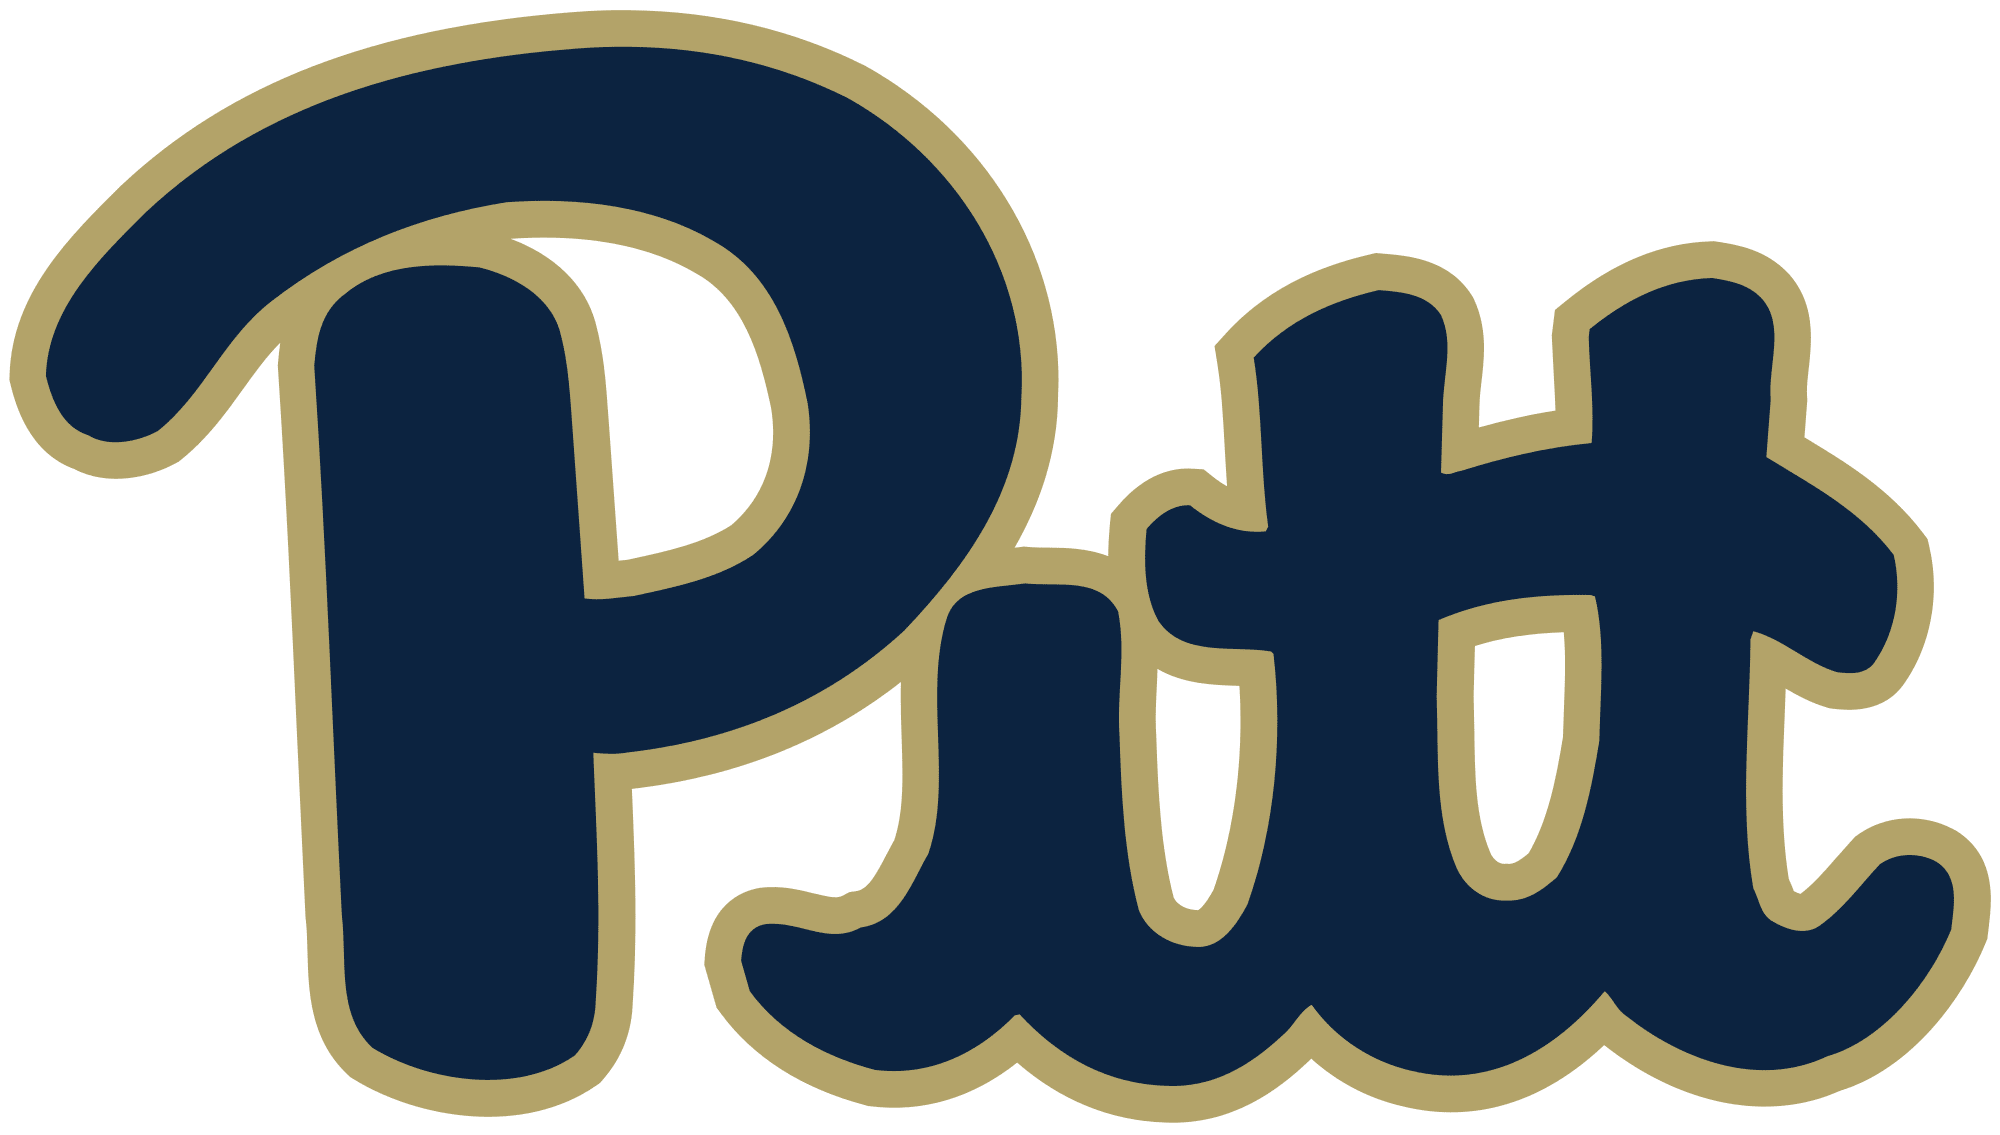 university-of-pittsburgh - Human Resources PHD